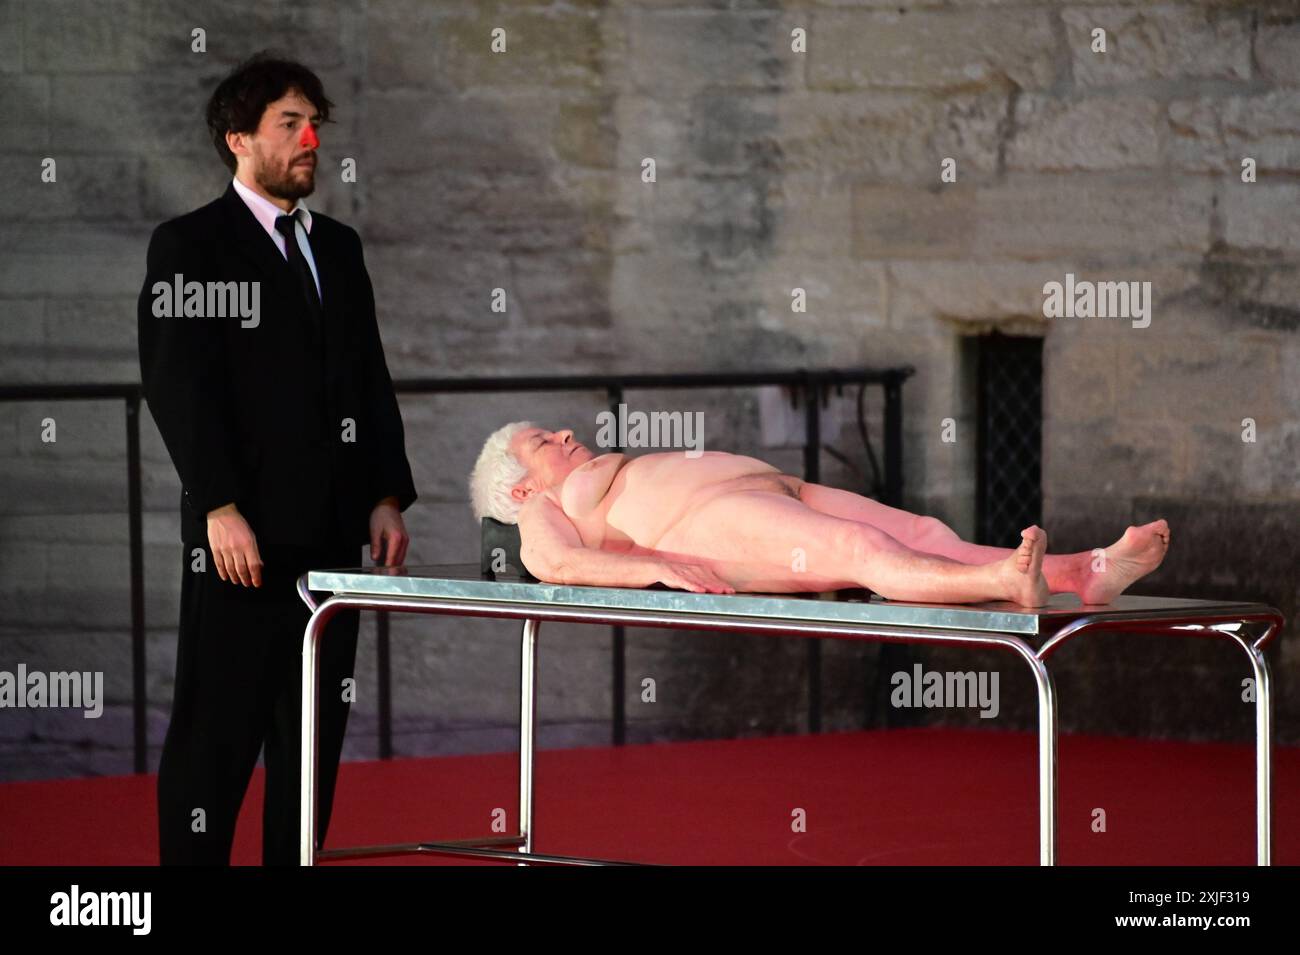 Festival d'Avignon IN 2024 'Damön. El funeral Bergman'by Angélica Liddell, performed in the main courtyard of the Palais des Papes, on 29 June 2024 (in front of the press)    with David Abad, Béatriz Alvirez, Yun Ananiev, Nicolas Chevalier, Guillaume Constanza, Elin Klinga, Angelica Liddell (not present), Bornja Lopez, Sindo Puche, Daniel Richard, and the participation of extras credit:Jacky Godard/Photo12 Stock Photo